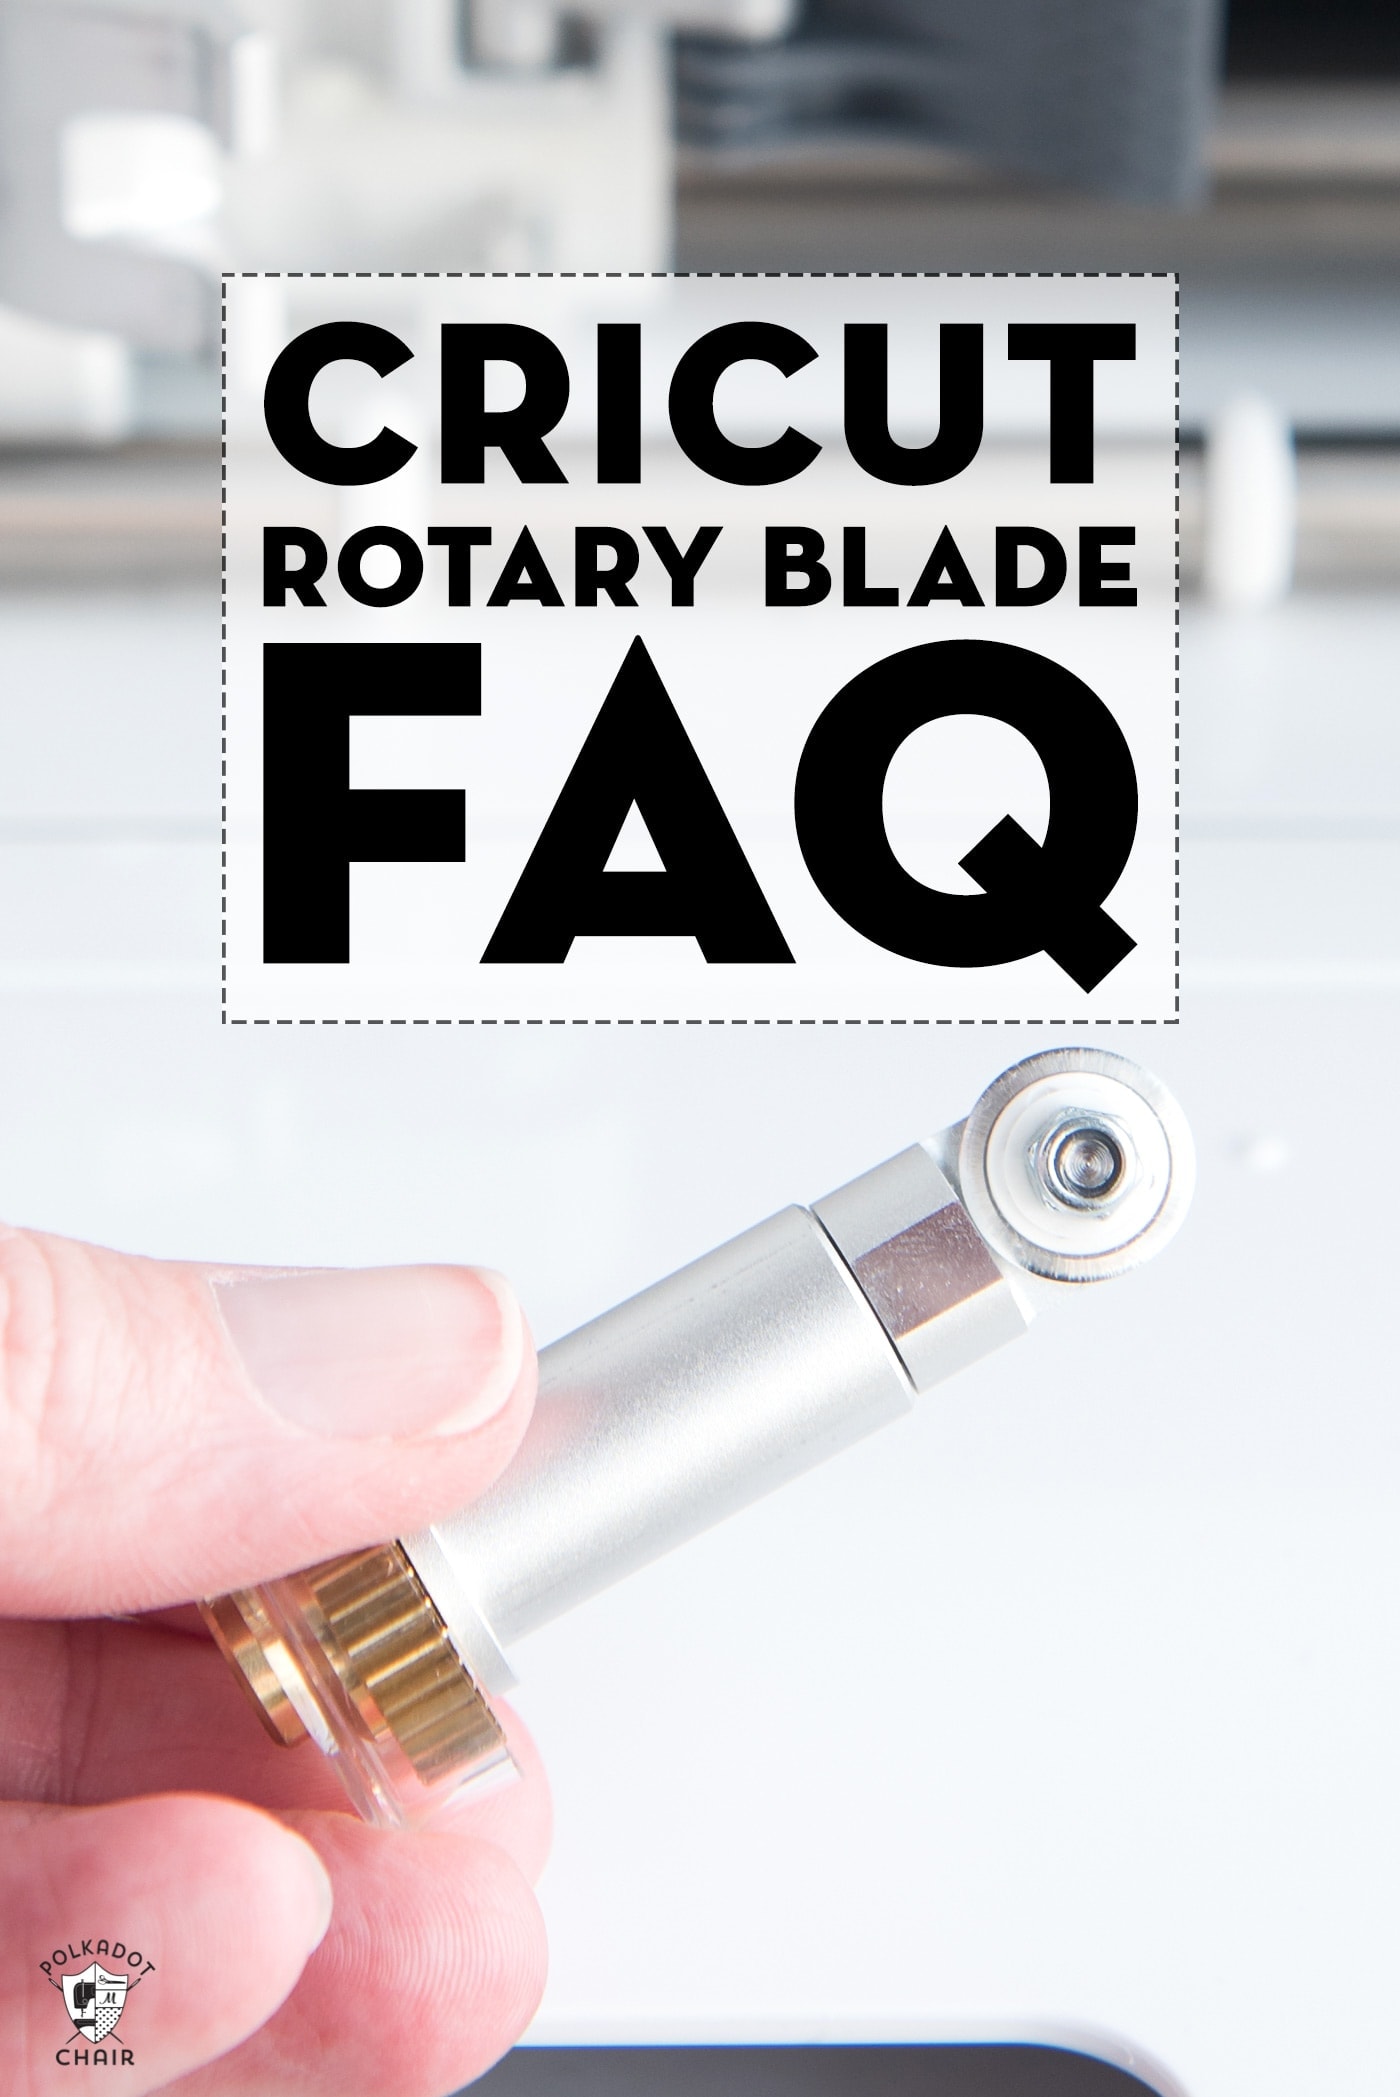 Answers to your FAQ's about the Cricut Rotary Blade - the Polka